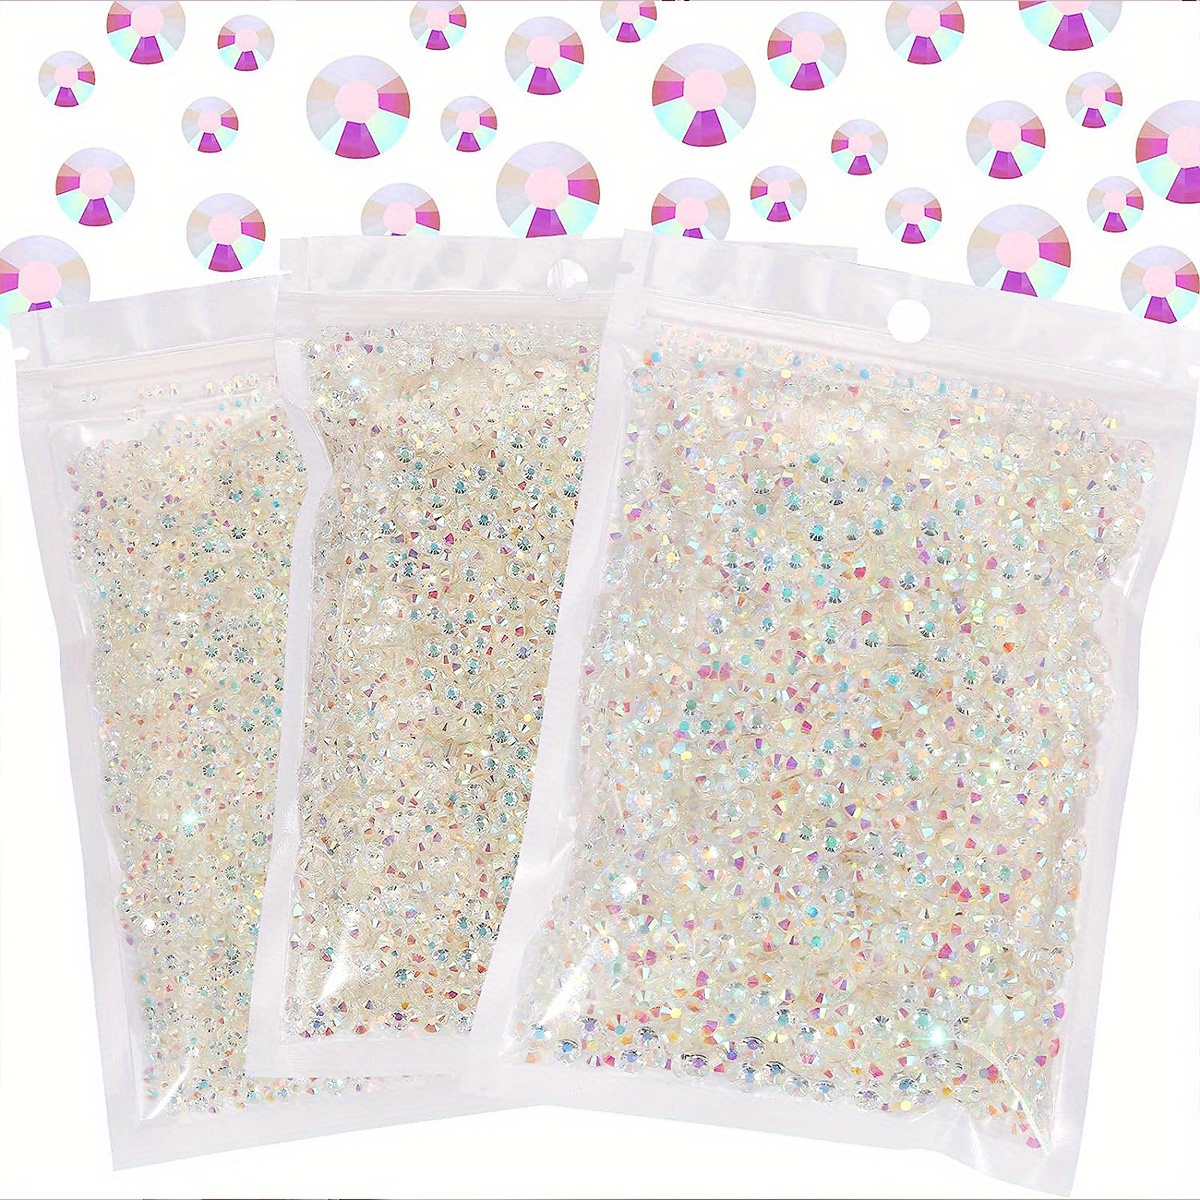 AB Resin Rhinestones Kits,2 Boxes 2-6MM Purple Violet Round Non Hotfix  Flatback Resin Rhinestones With Silver Bottom Bedazzling Crystal Gems For  Nail